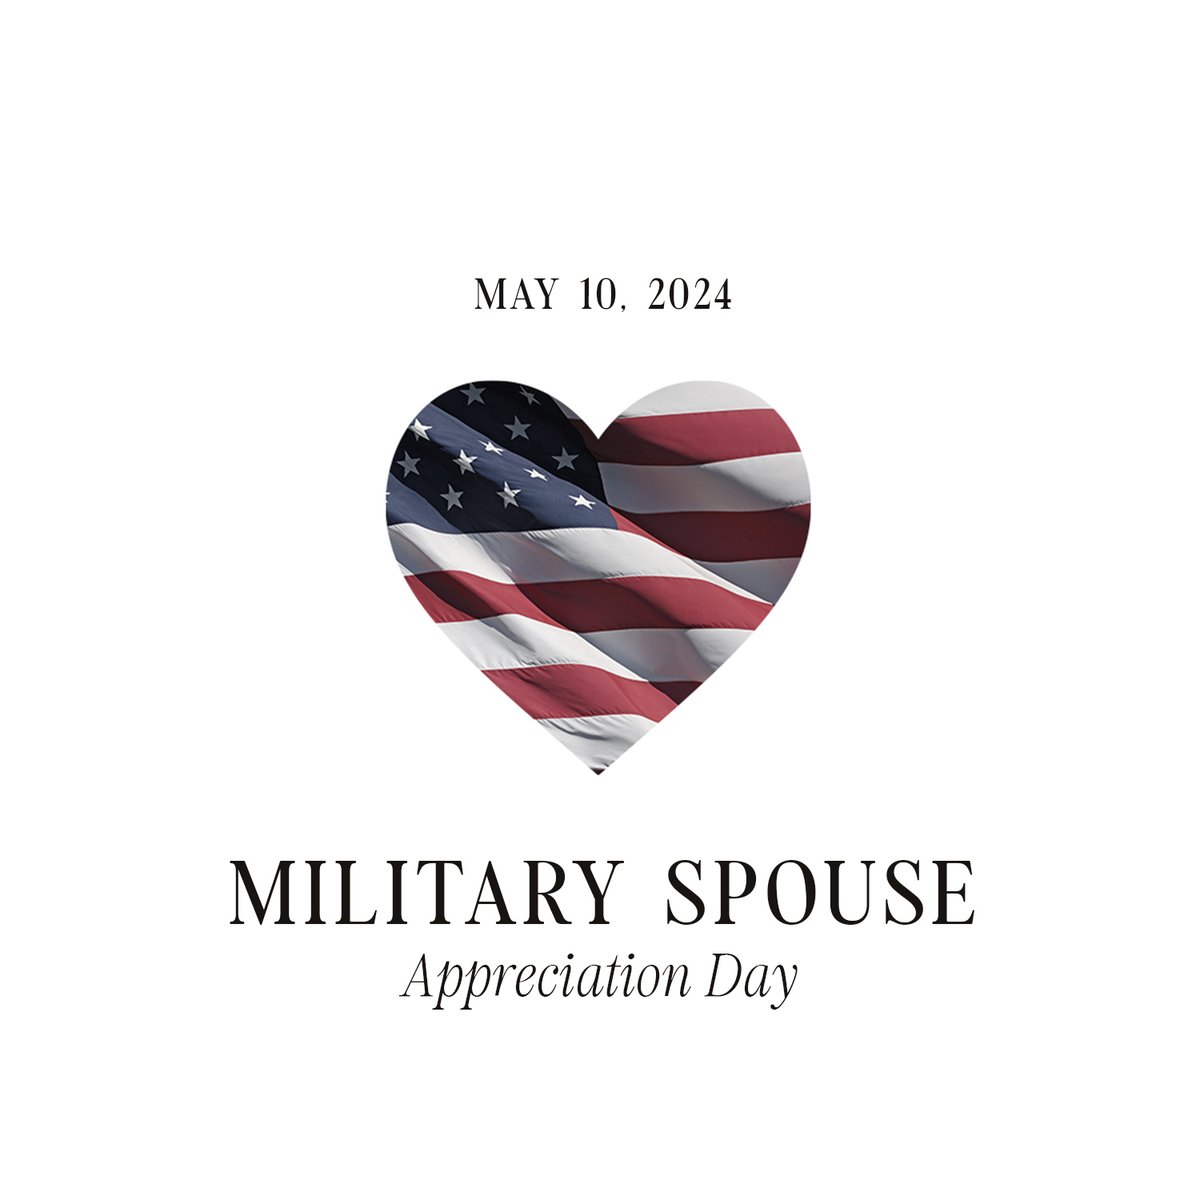 Military spouses are an endless source of strength, support & encouragement, which is essential in helping our servicemembers accomplish their vital mission defending us. Today we celebrate these heroes behind and beside our men & women in uniform.
#MilitarySpouseAppreciationDay